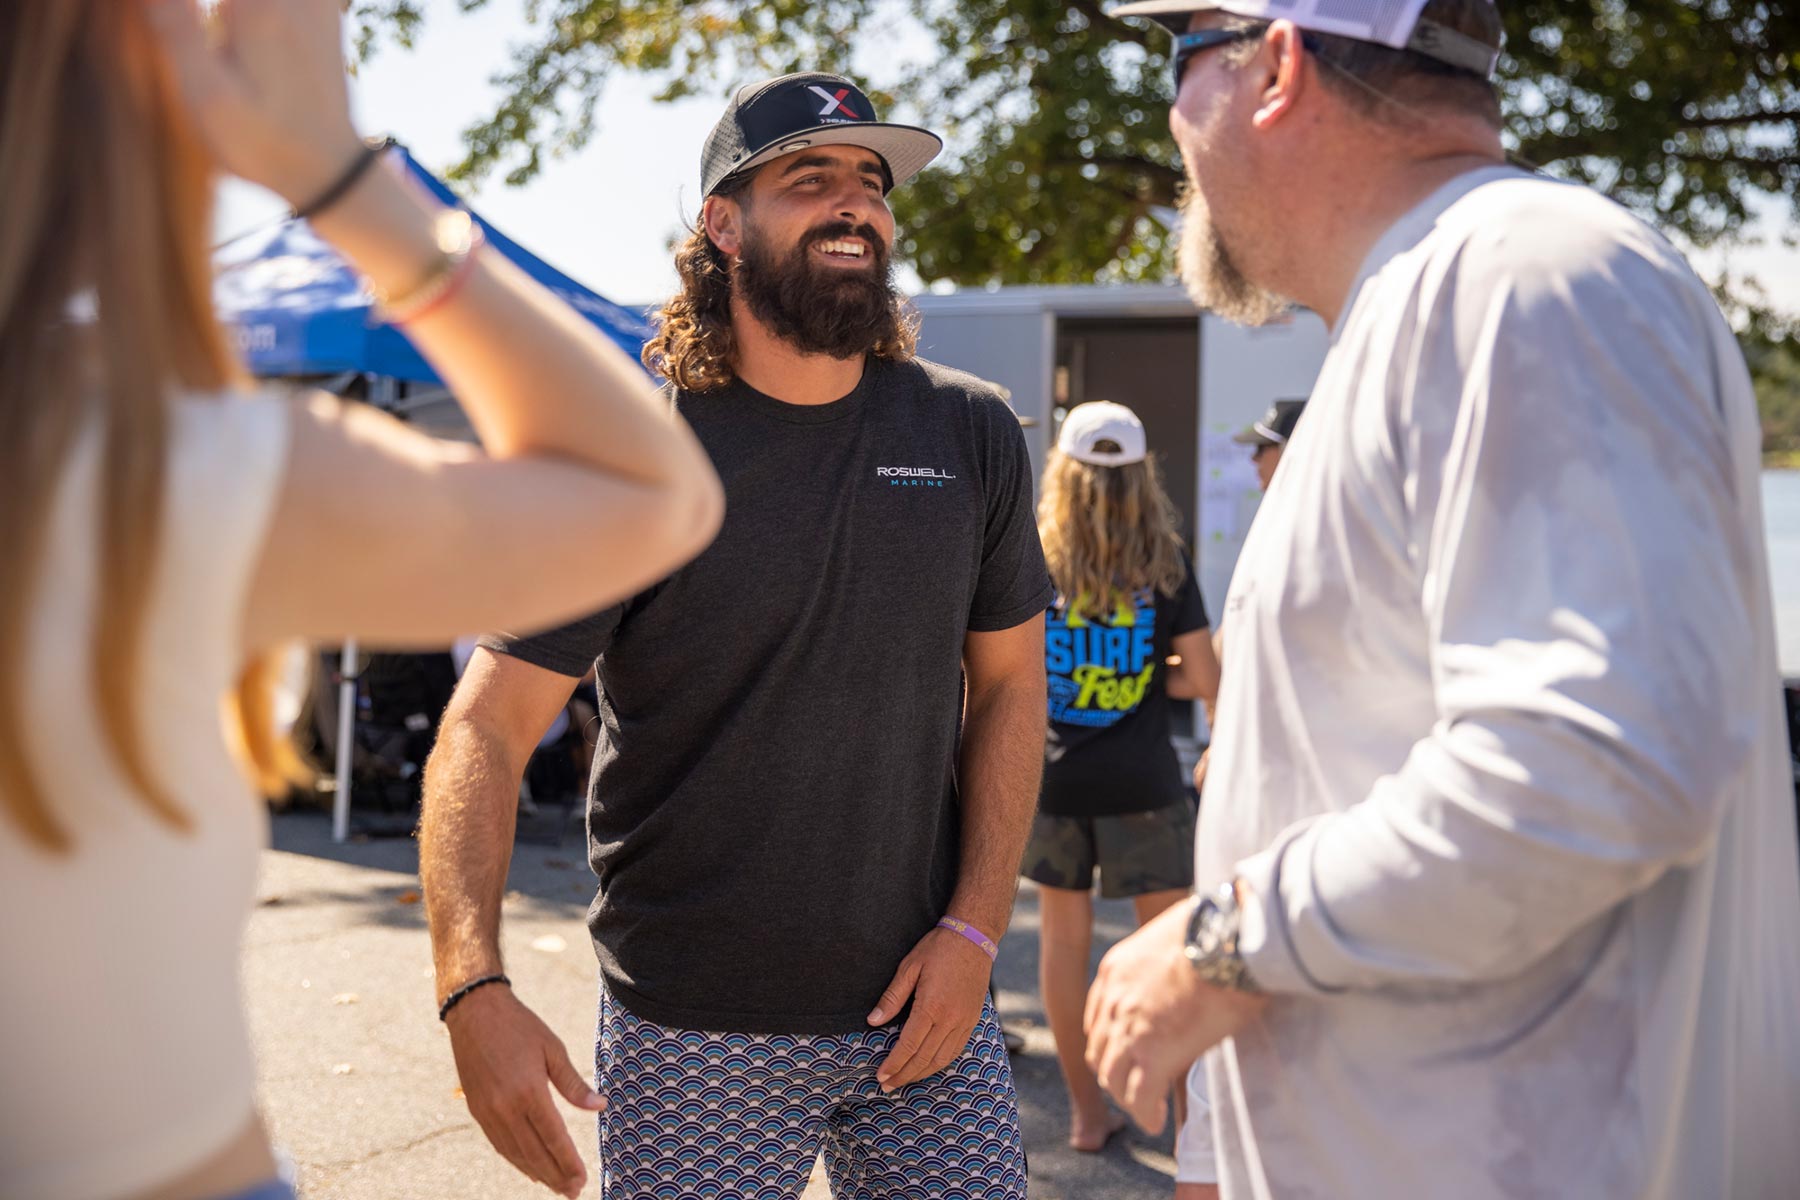 A man with a beard is talking to a group of people about the wake surfing competition.